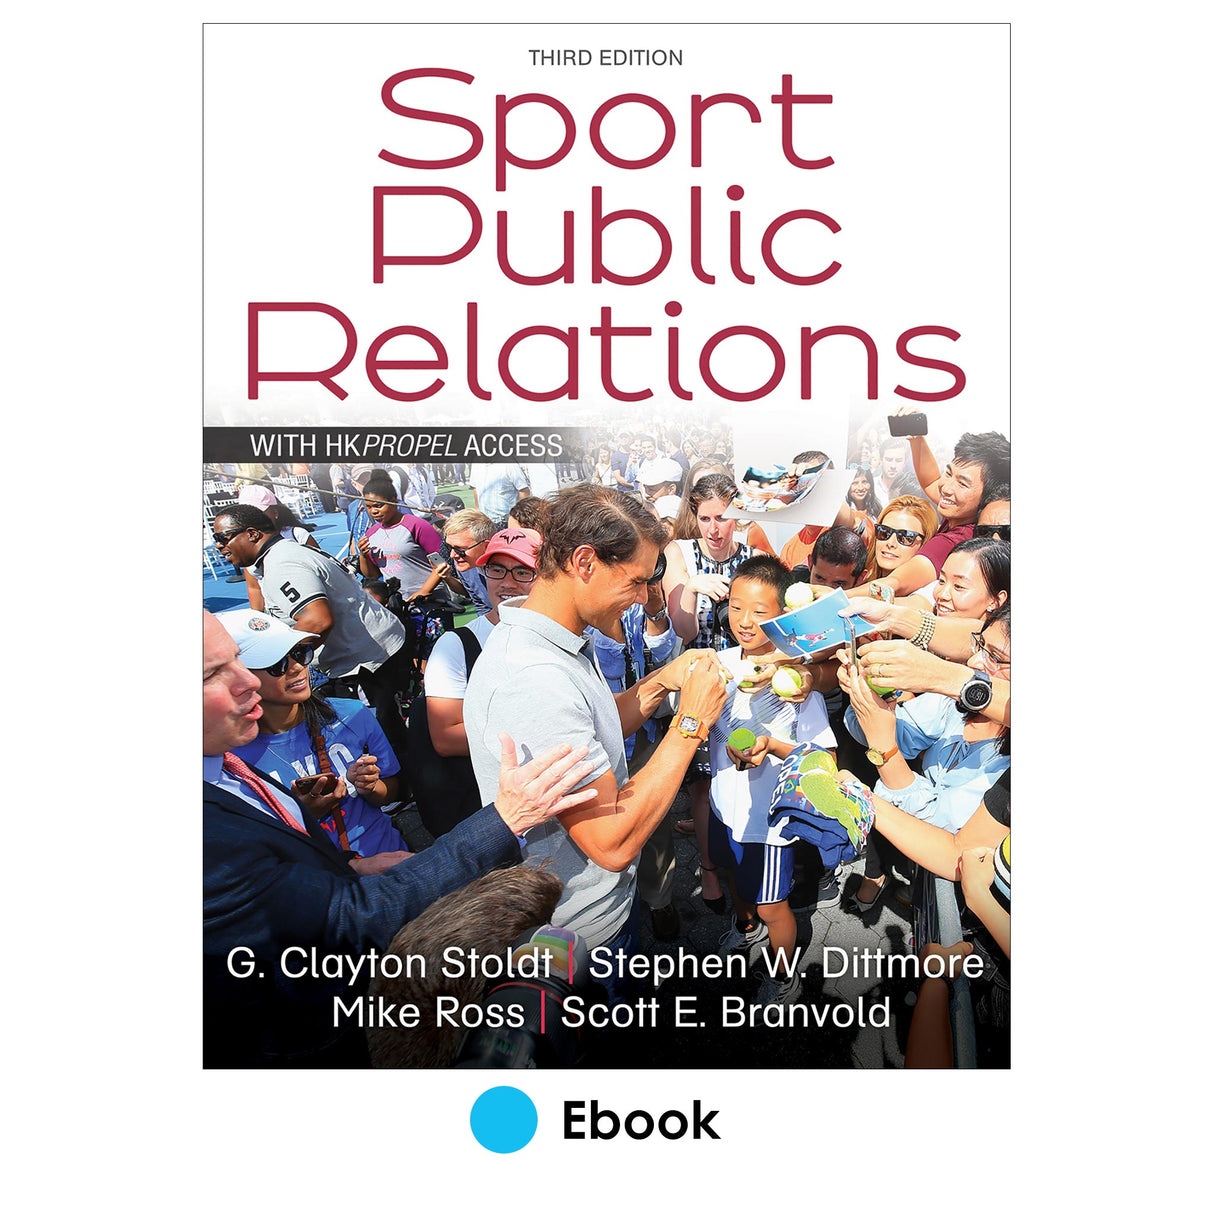 Sport Public Relations 3rd Edition Ebook With HKPropel Access